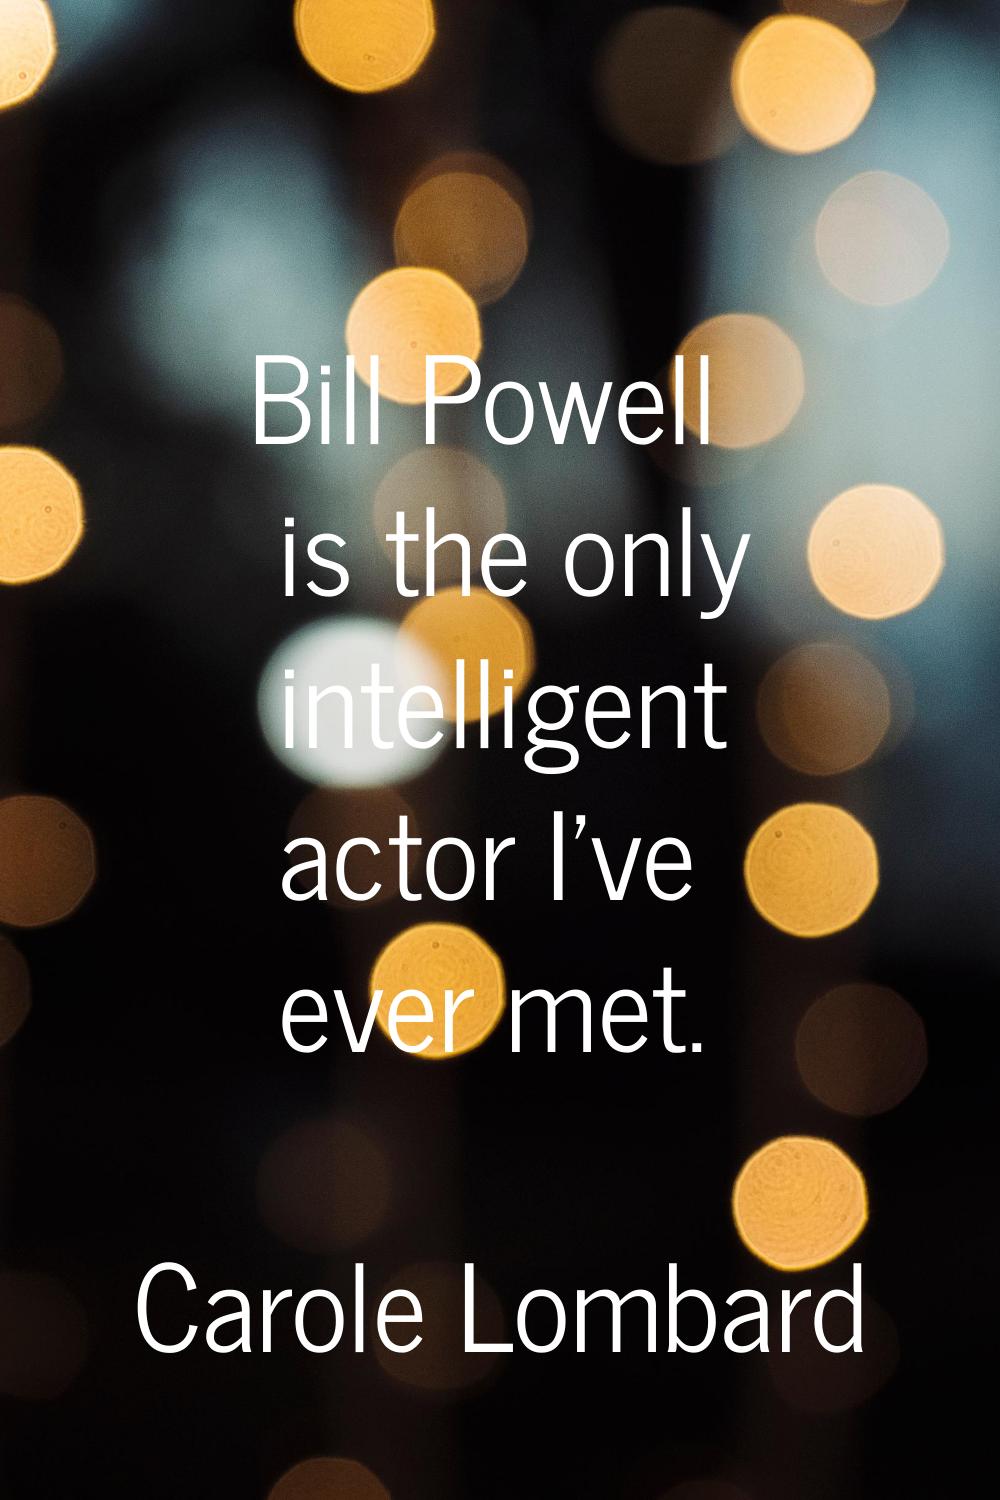 Bill Powell is the only intelligent actor I've ever met.